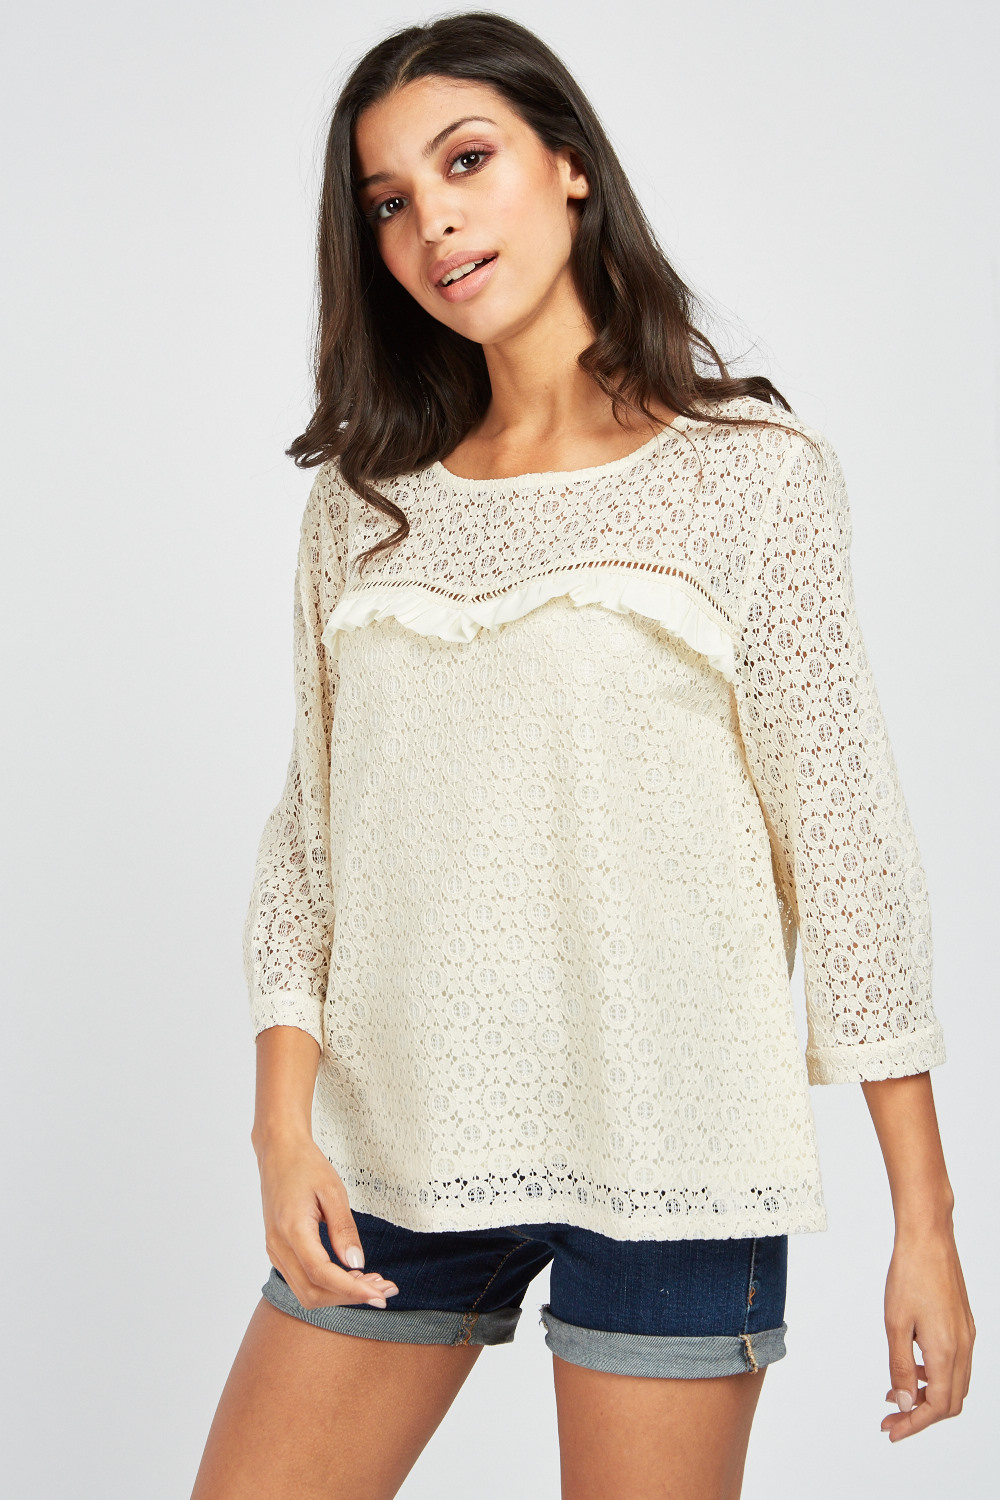 Ruffle Trim Lace Top - Just $6